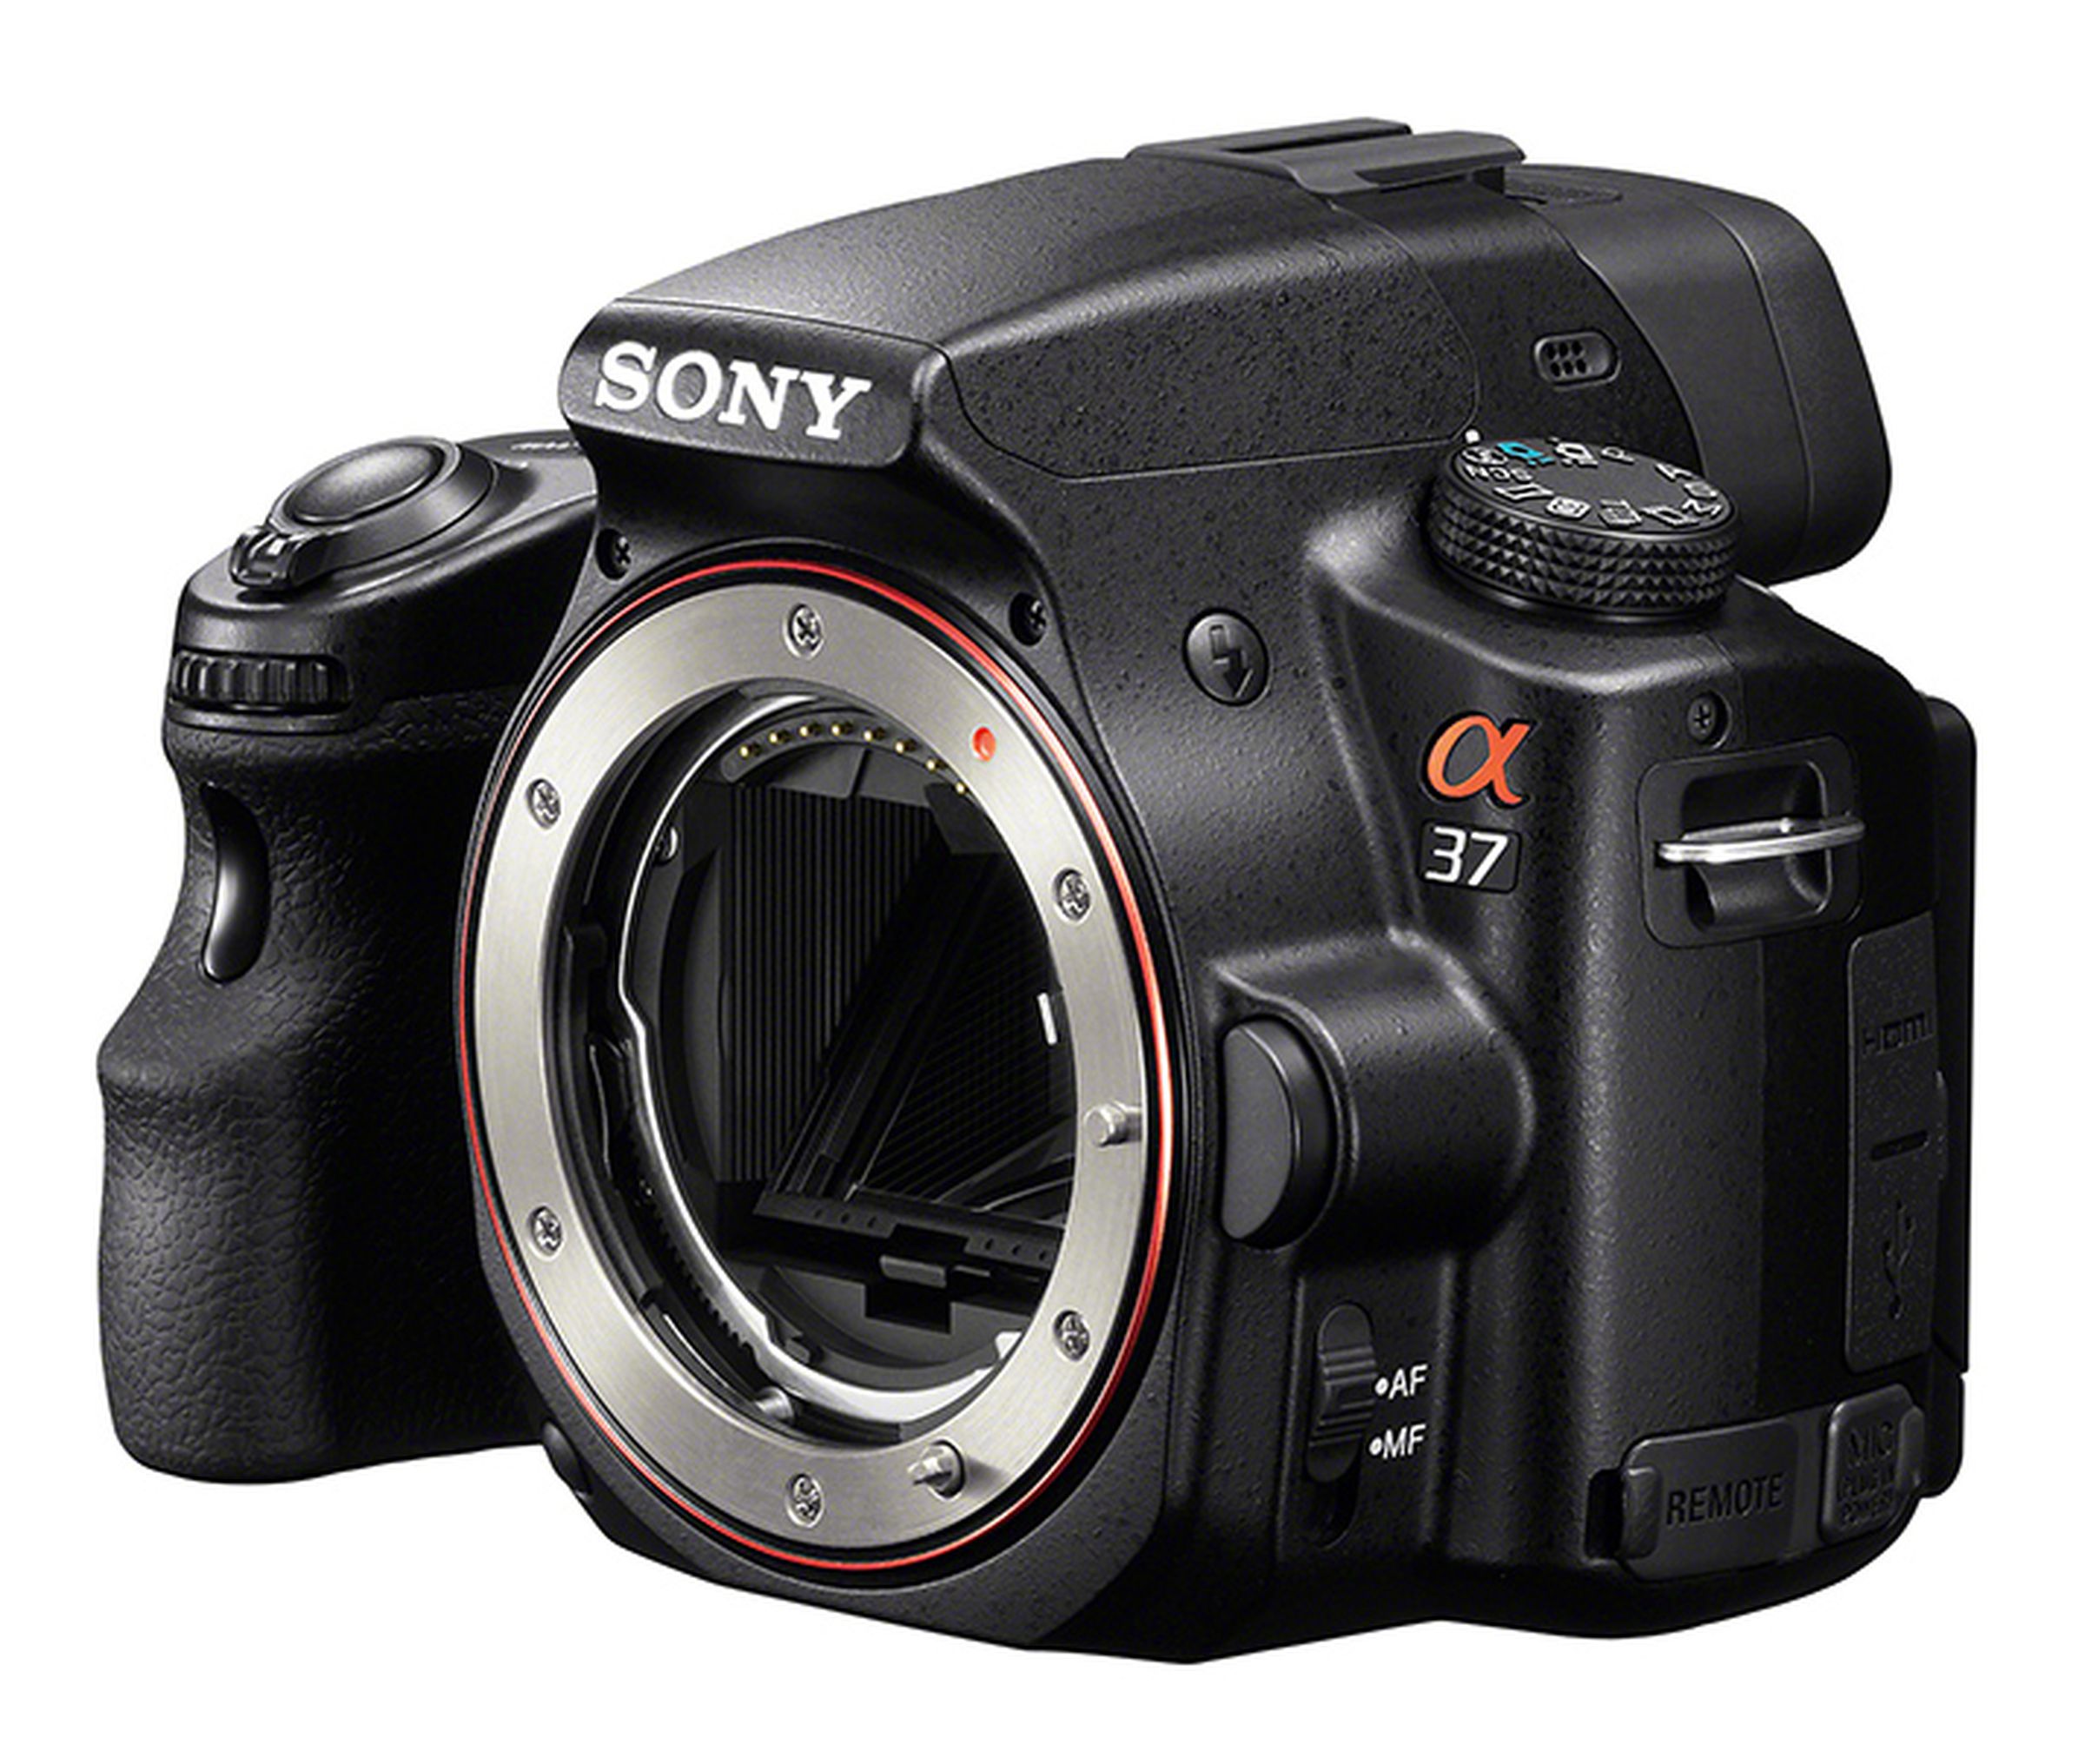 Sony Alpha SLT-A37 press pictures